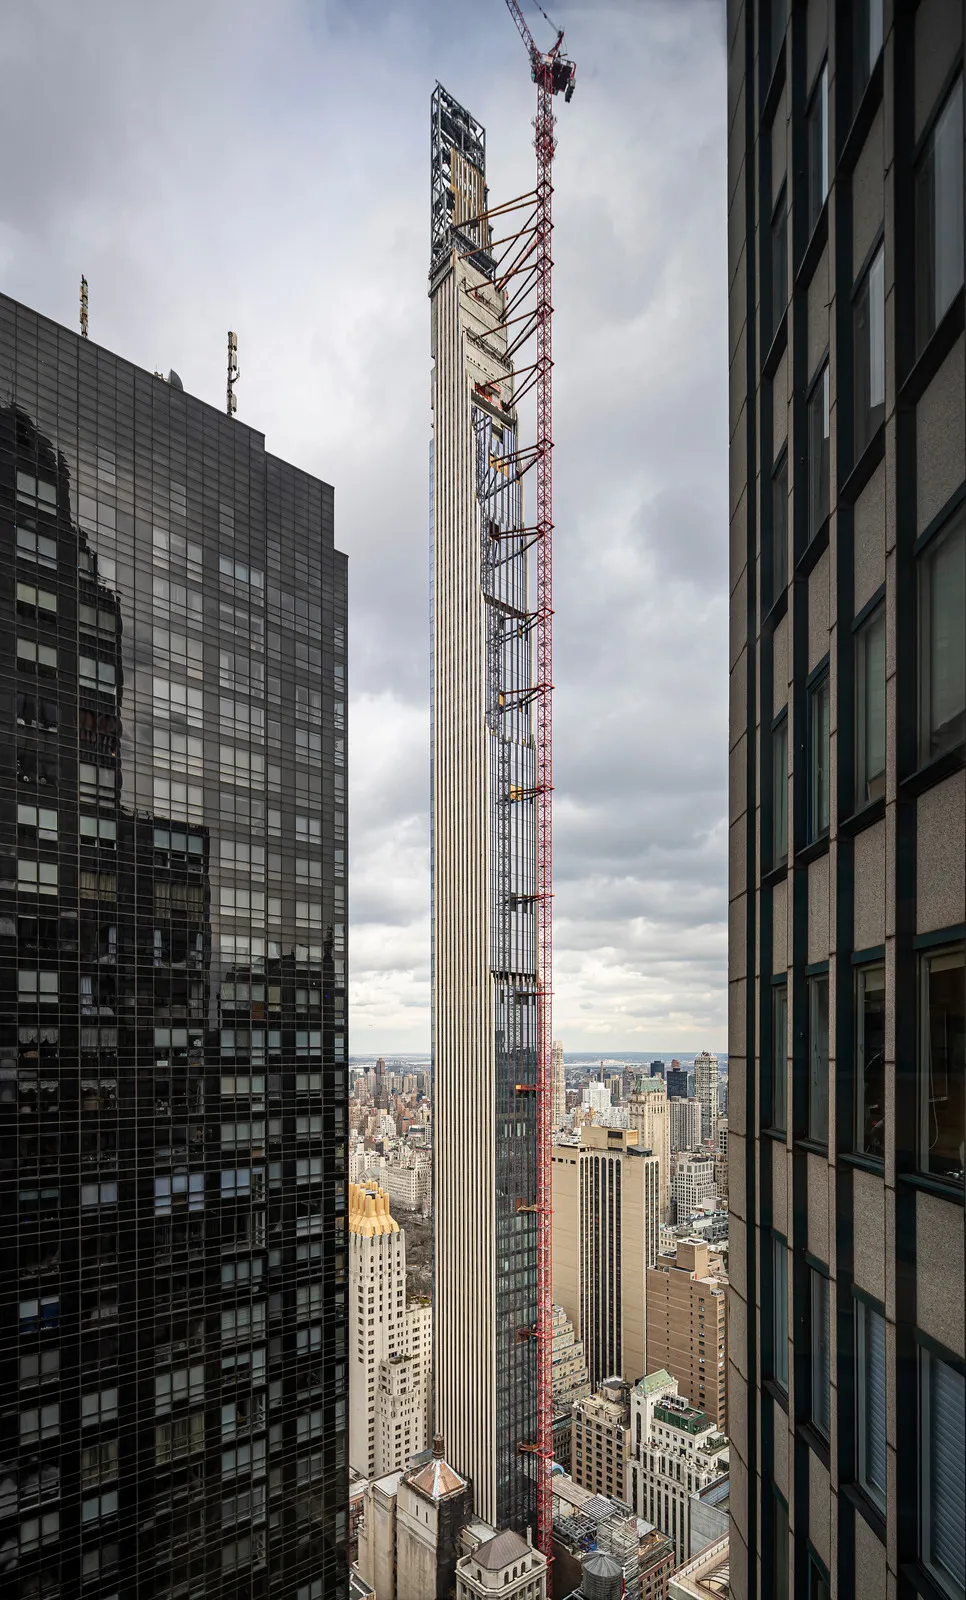 SHoP's '111 west 57th street' skyscraper documented by paul clemence